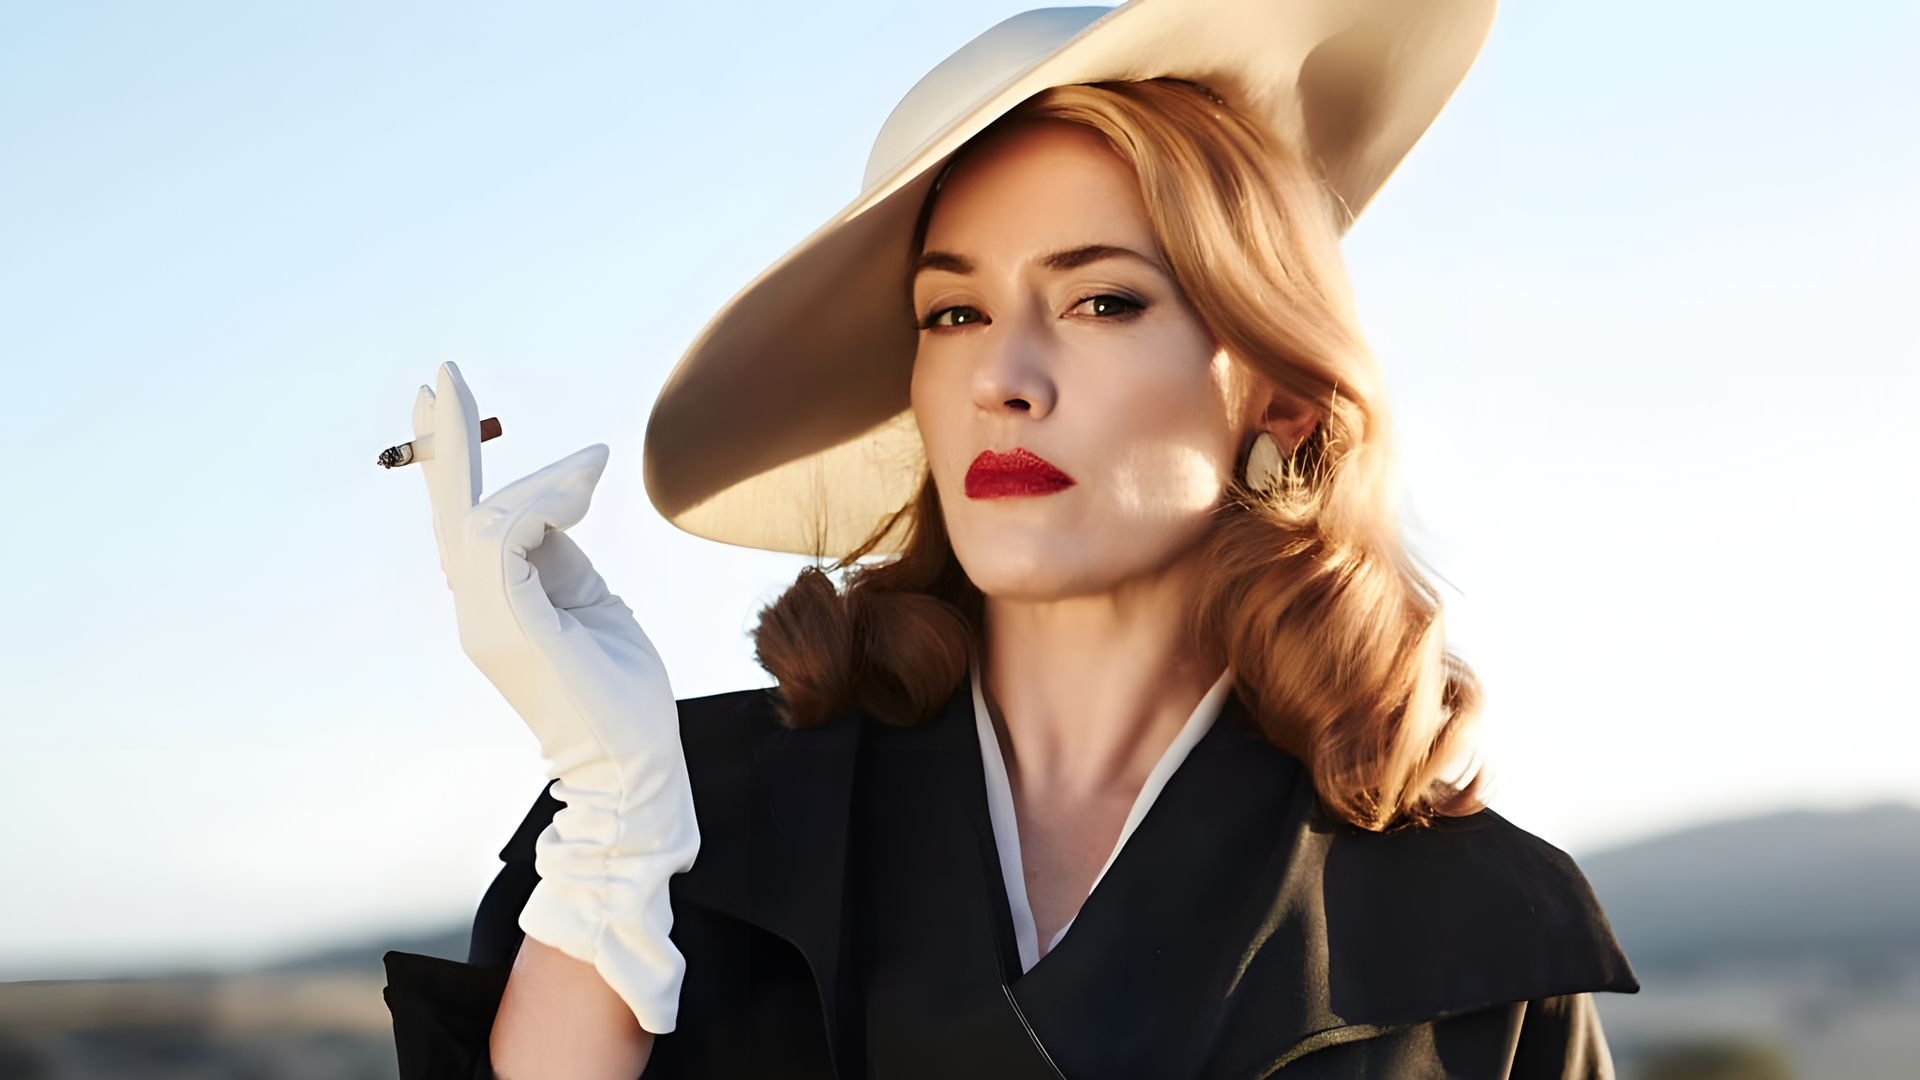 Kate Winslet in the movie 'The Dressmaker'